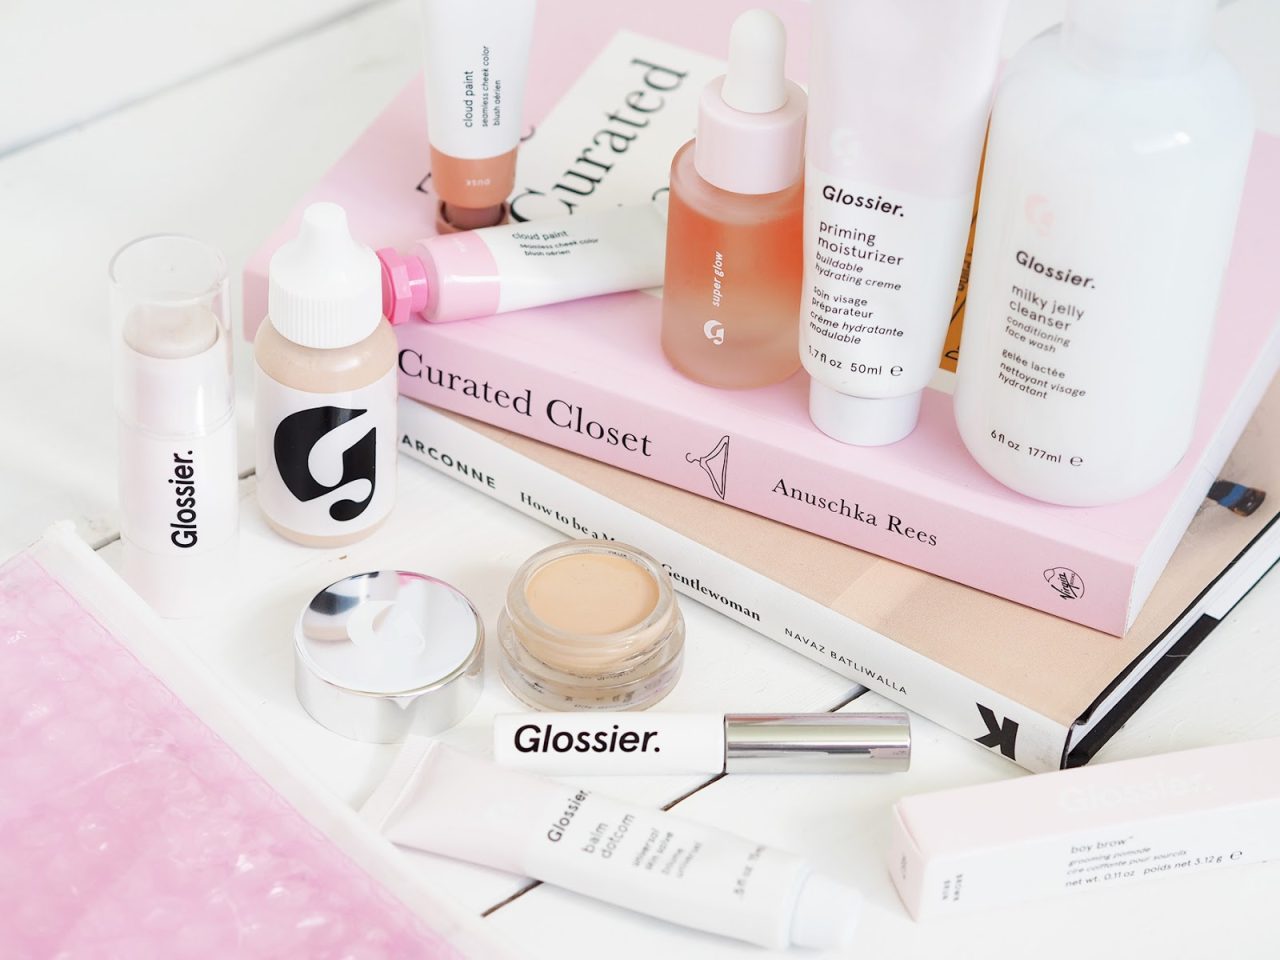 As Glossier realigns, it taps YouTube’s new Shoppable Shorts Challenge